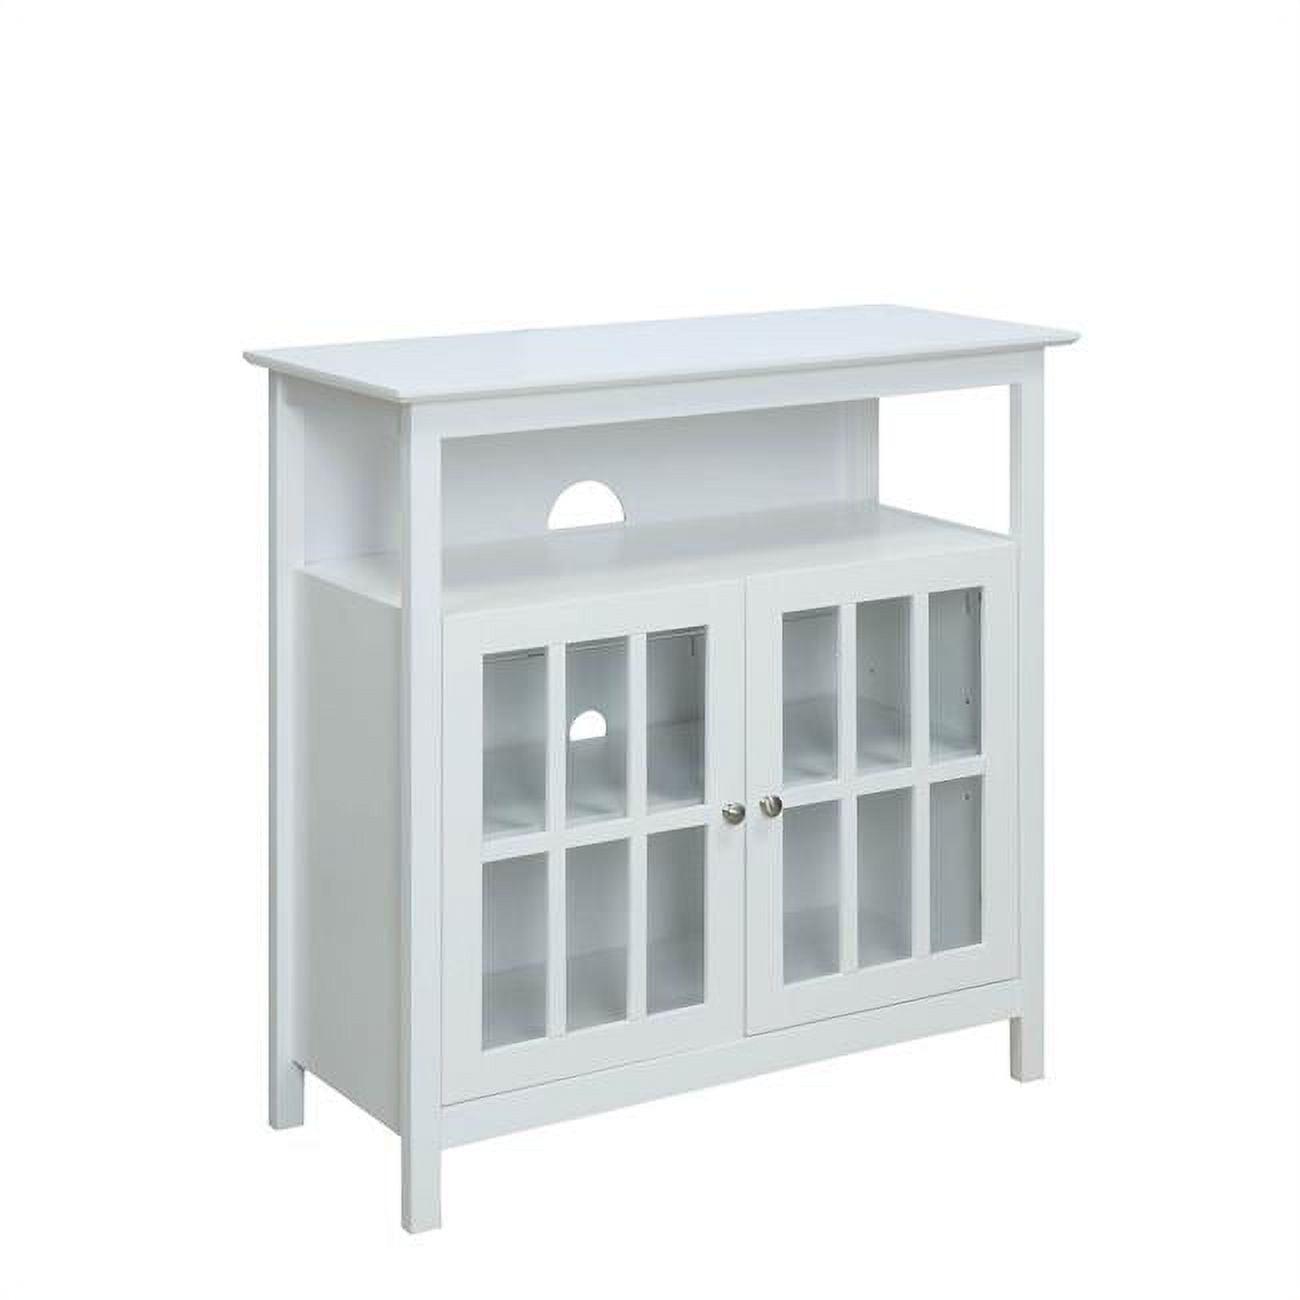 Big Sur Highboy 36" White TV Stand with Storage Cabinets